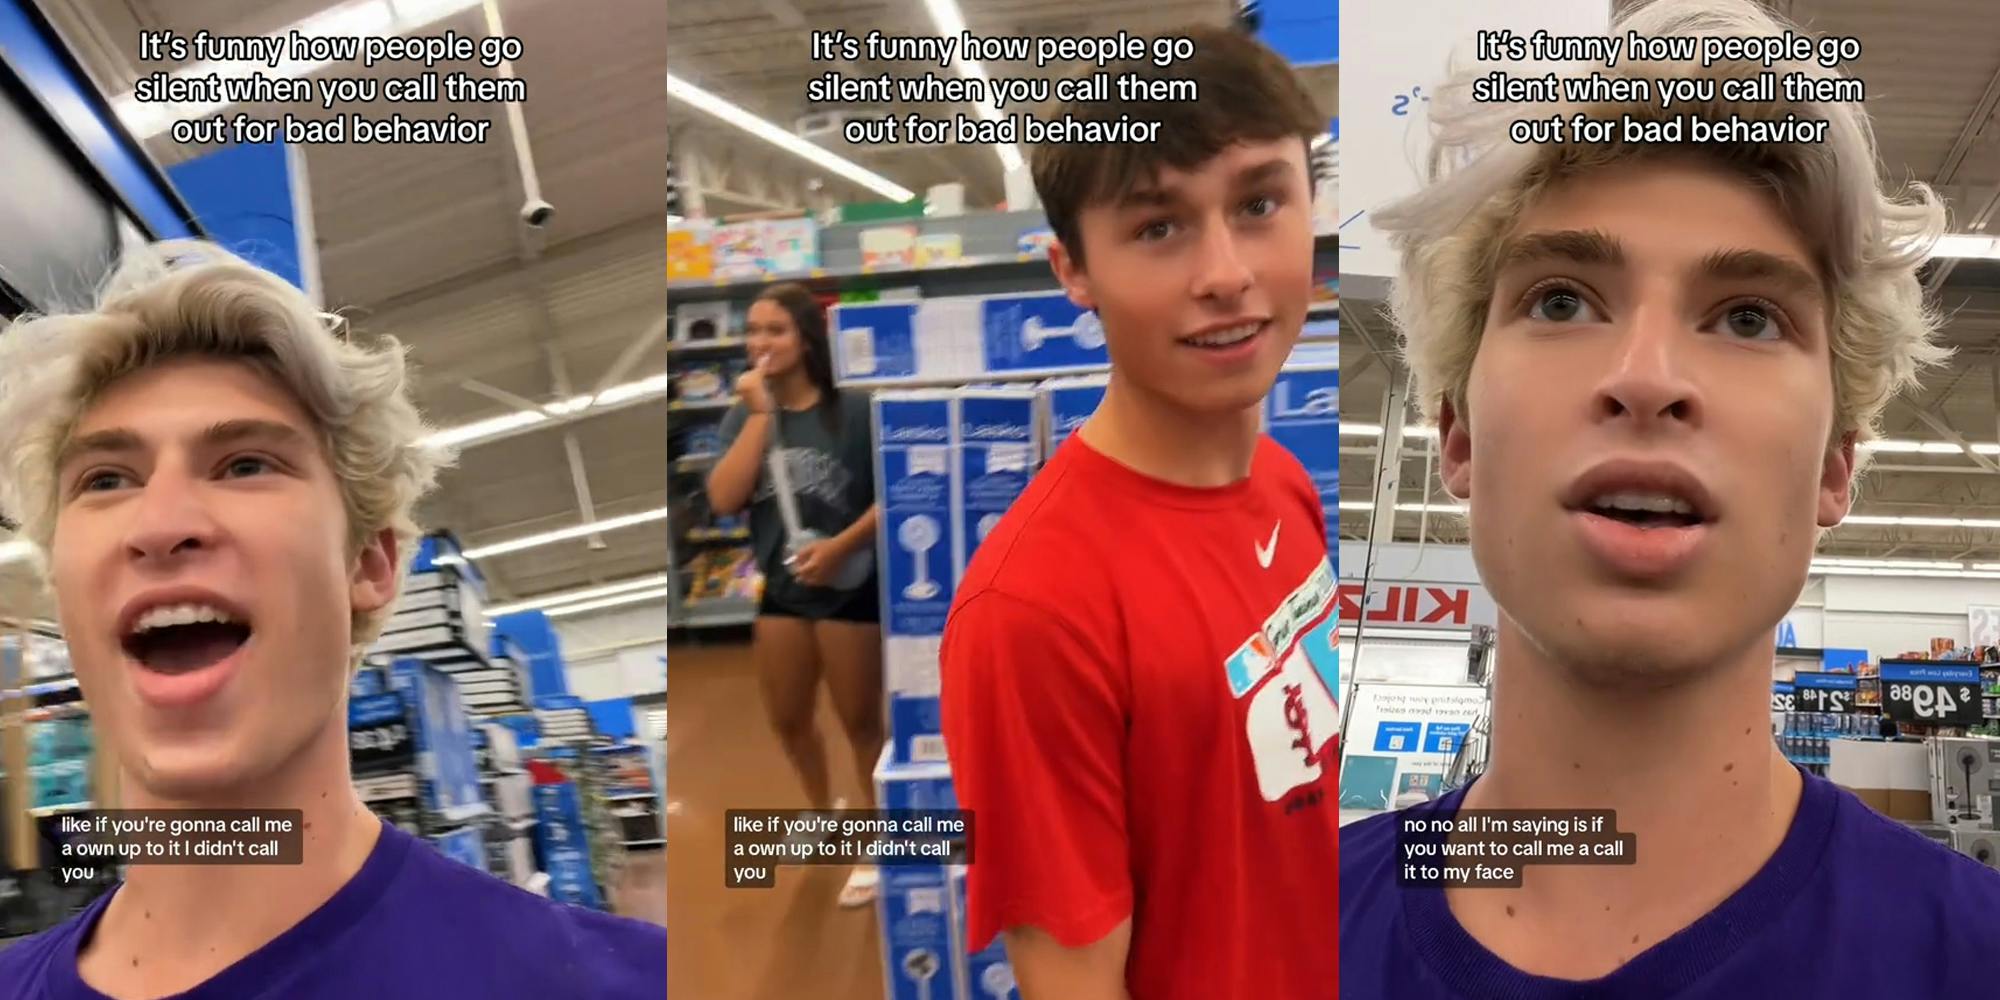 man speaking in Walmart with caption "It's funny how people go silent when you call them out for bad behavior" "like if you're gonna call me a own up to it! I didn't call you" (l) man speaking in Walmart with caption "It's funny how people go silent when you call them out for bad behavior" "like if you're gonna call me a own up to it! I didn't call you" (c) man speaking in Walmart with caption "It's funny how people go silent when you call them out for bad behavior" "no no all I'm saying is if you want to call me a call it to my face" (r)